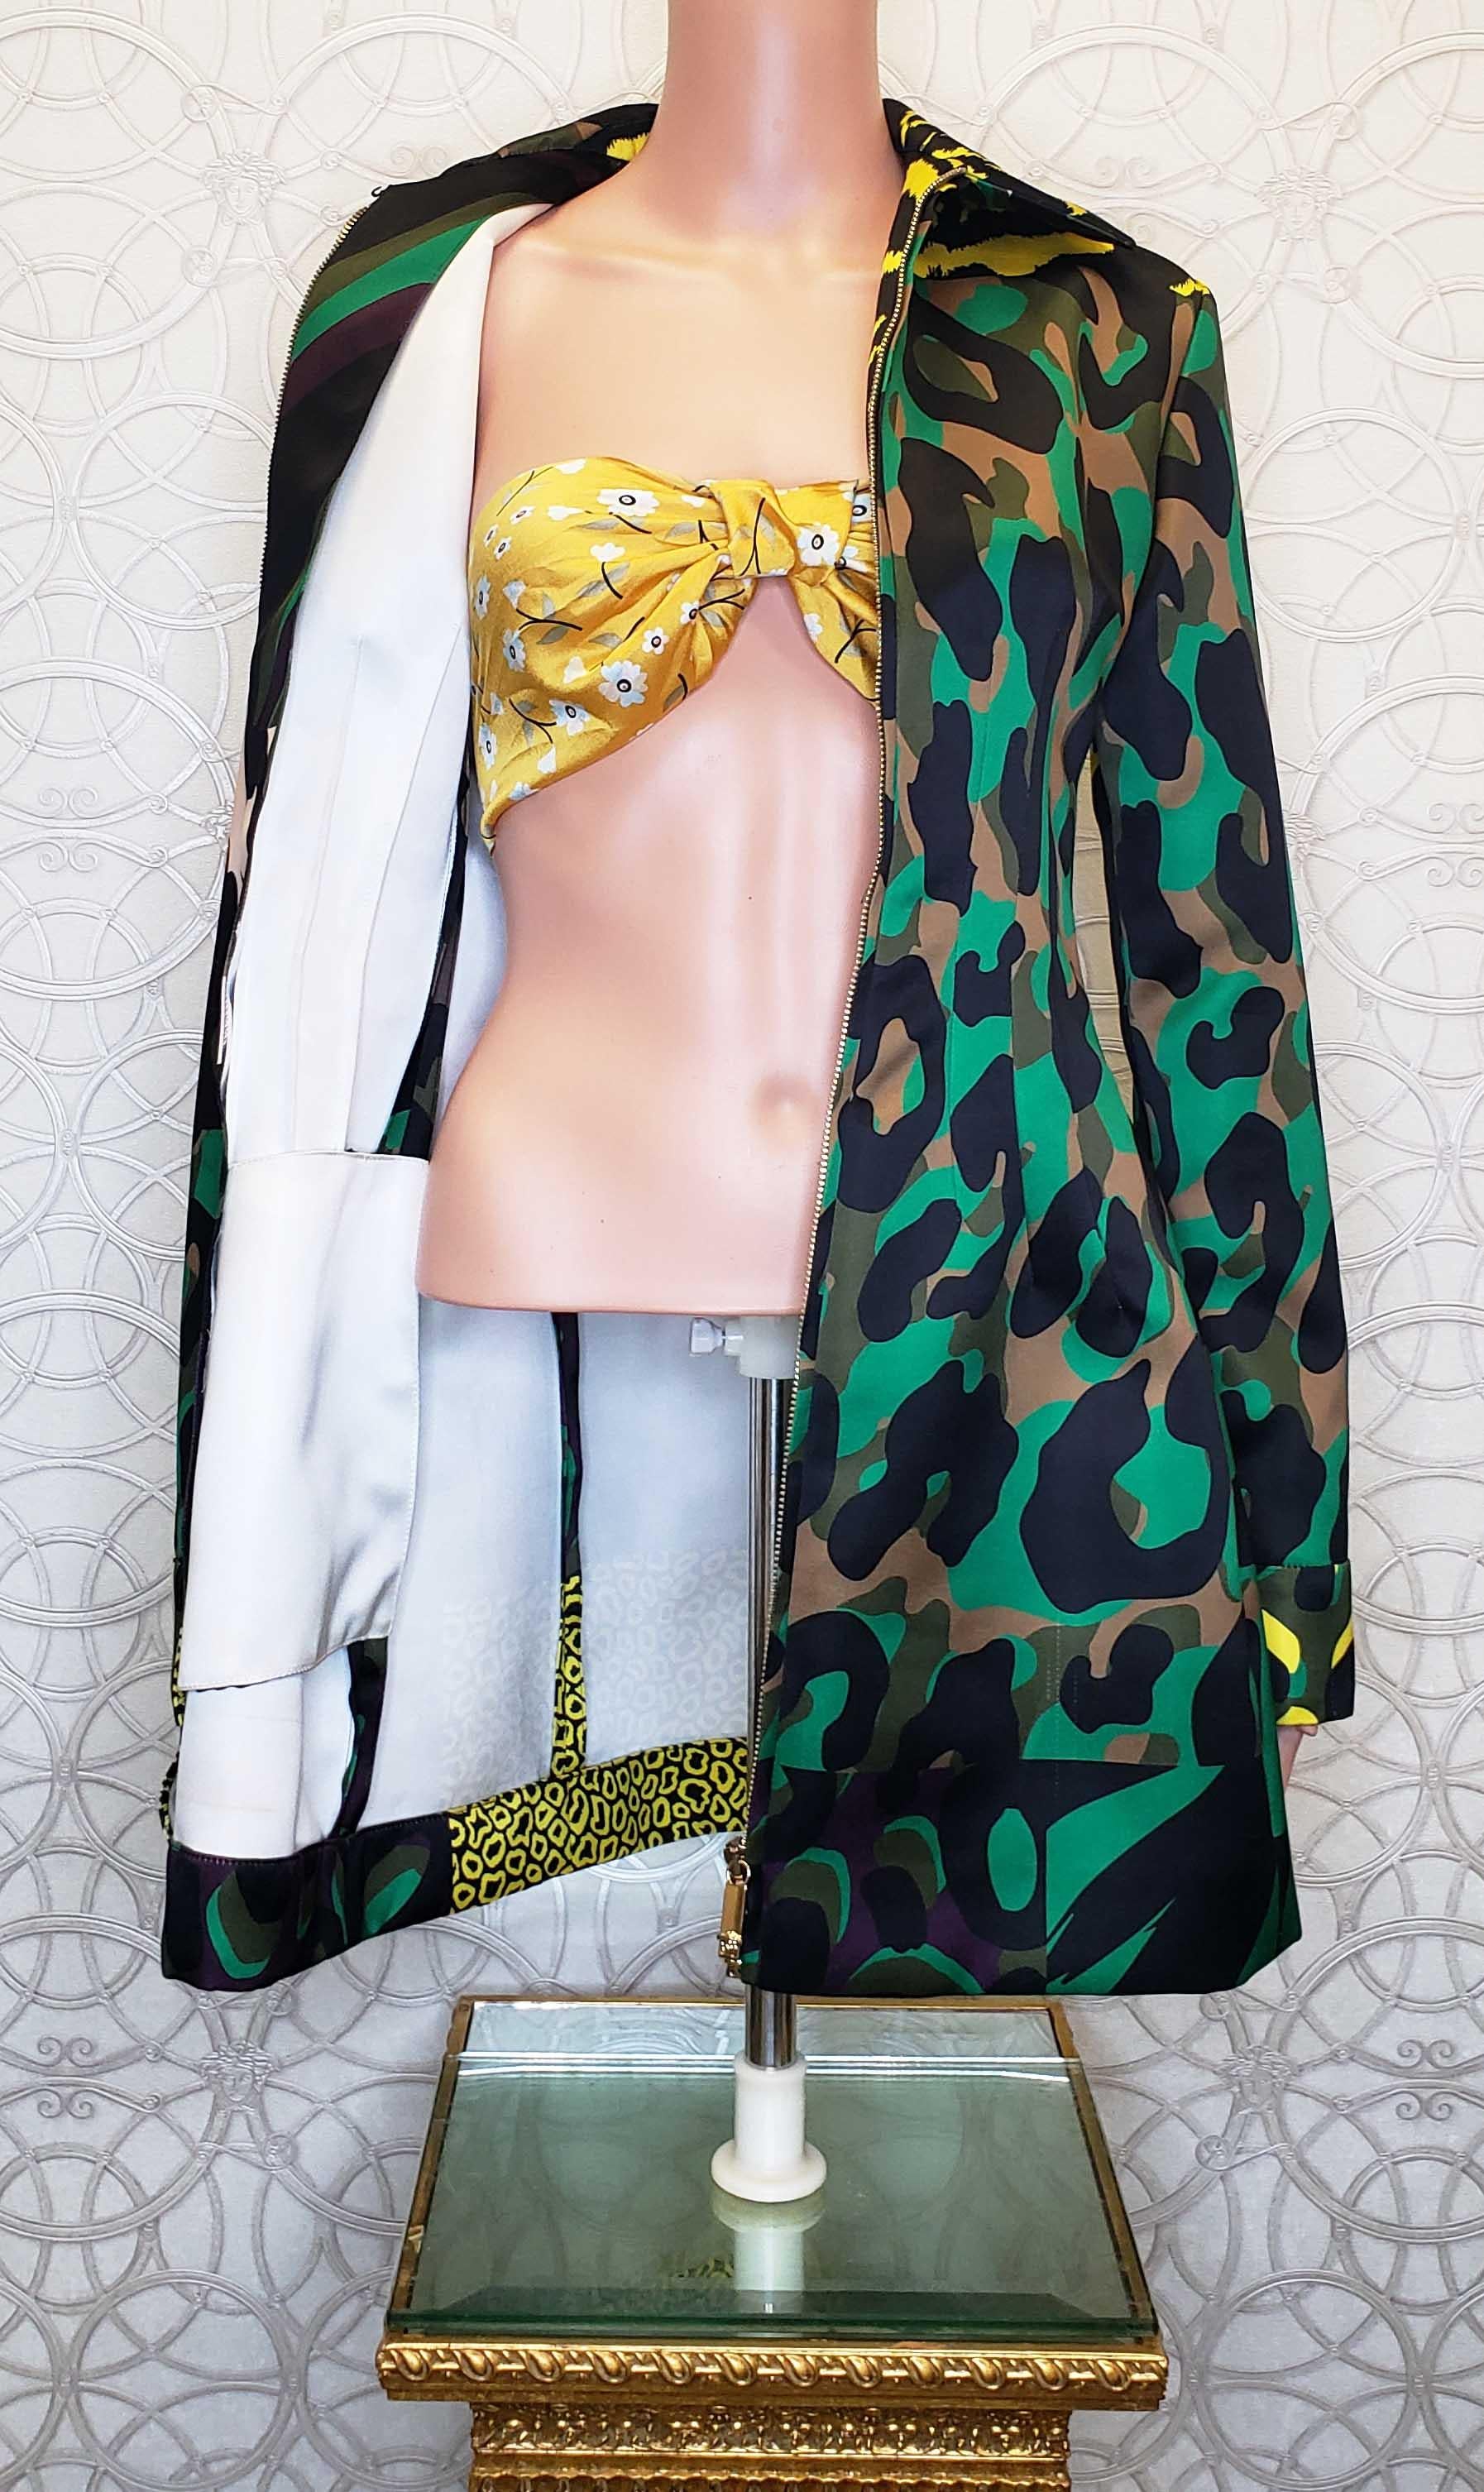 S/S 2016 L # 31 NEW VERSACE MULTI COLOR MILITARY Coat 38 - 2 For Sale 7